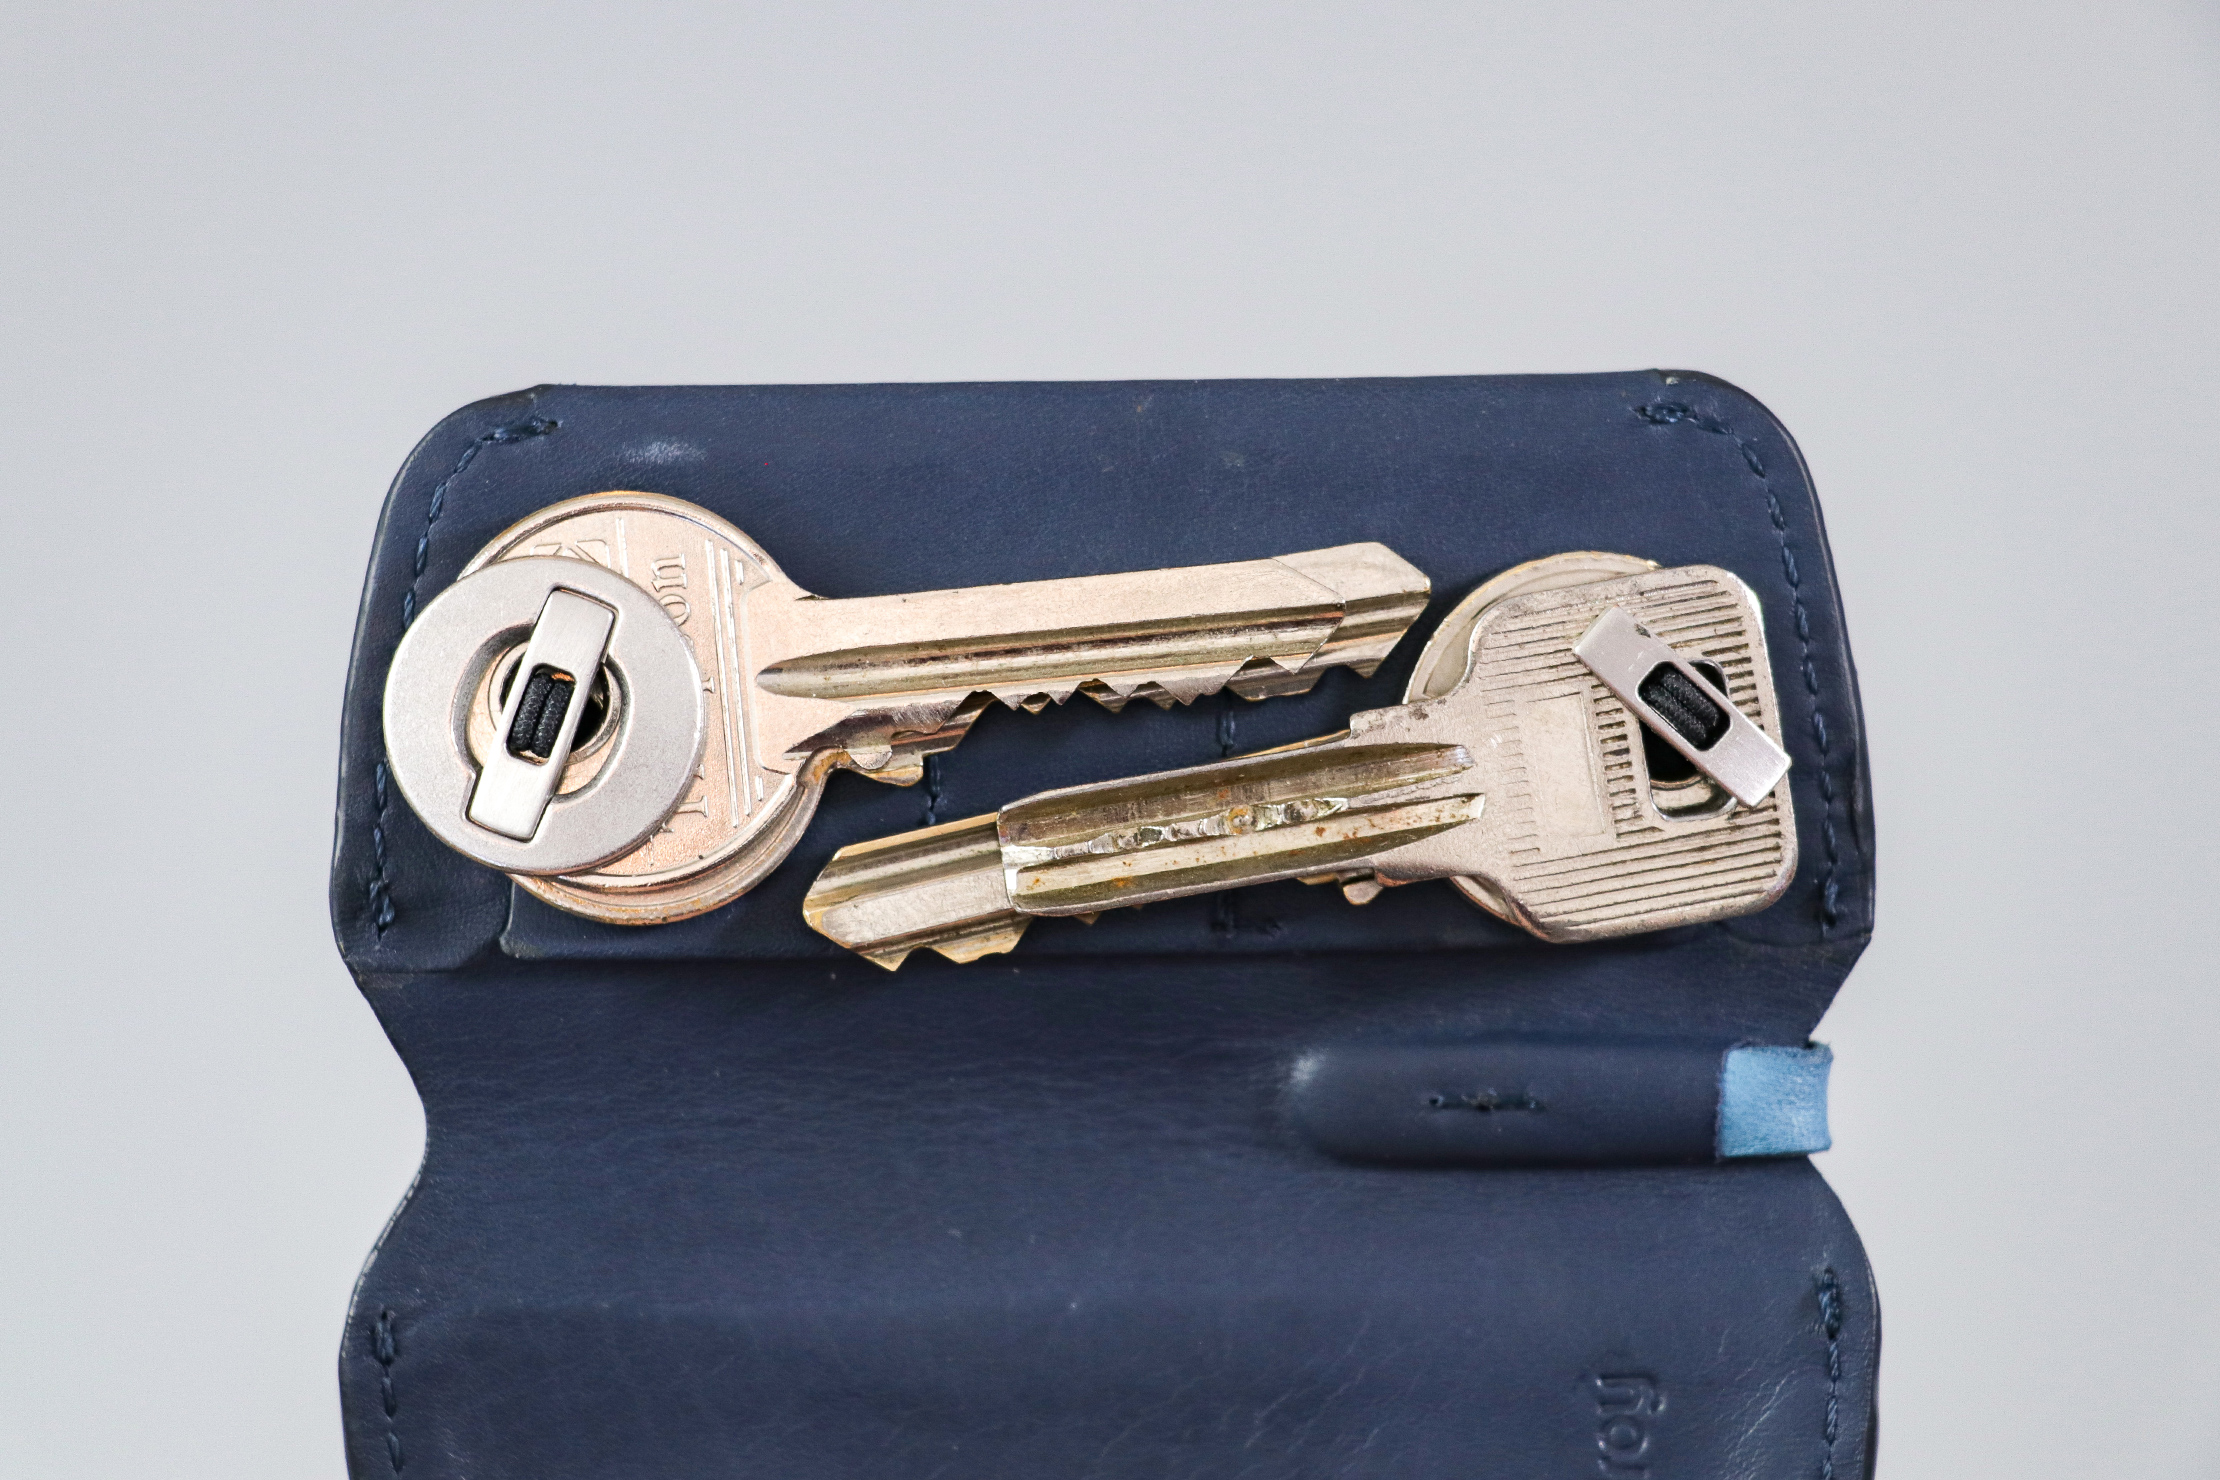 Bellroy Key Cover Plus With Two Keys In Either Side